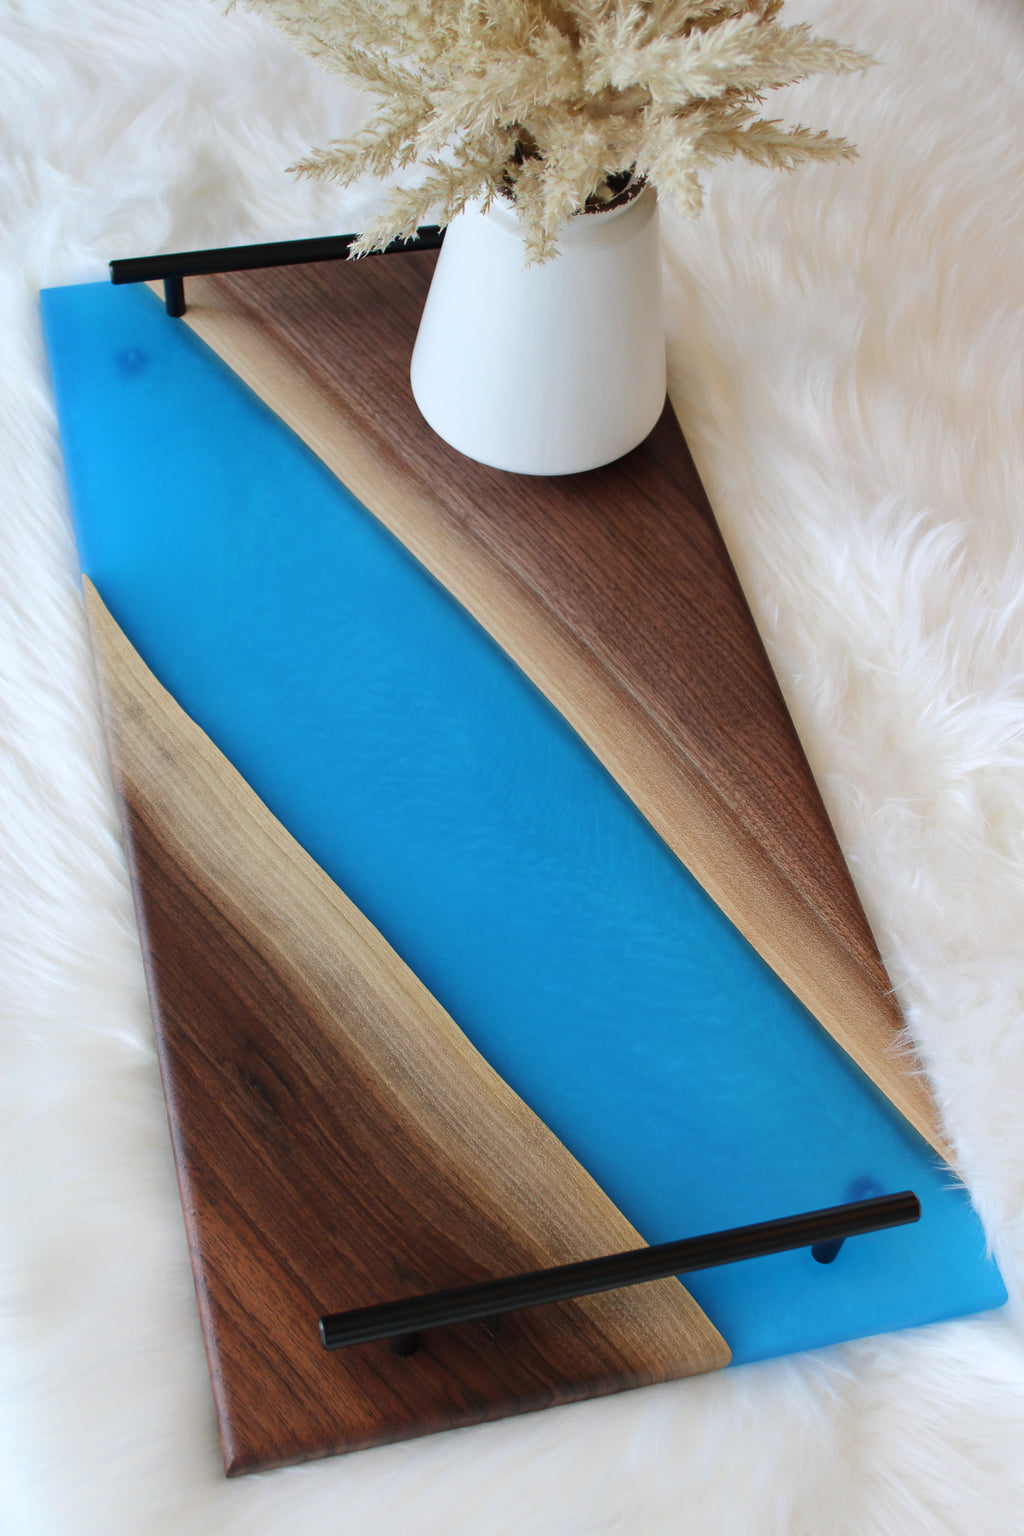 Black Walnut Charcuterie Cheese Board/Serving Tray with central blue resin river and black metal handles